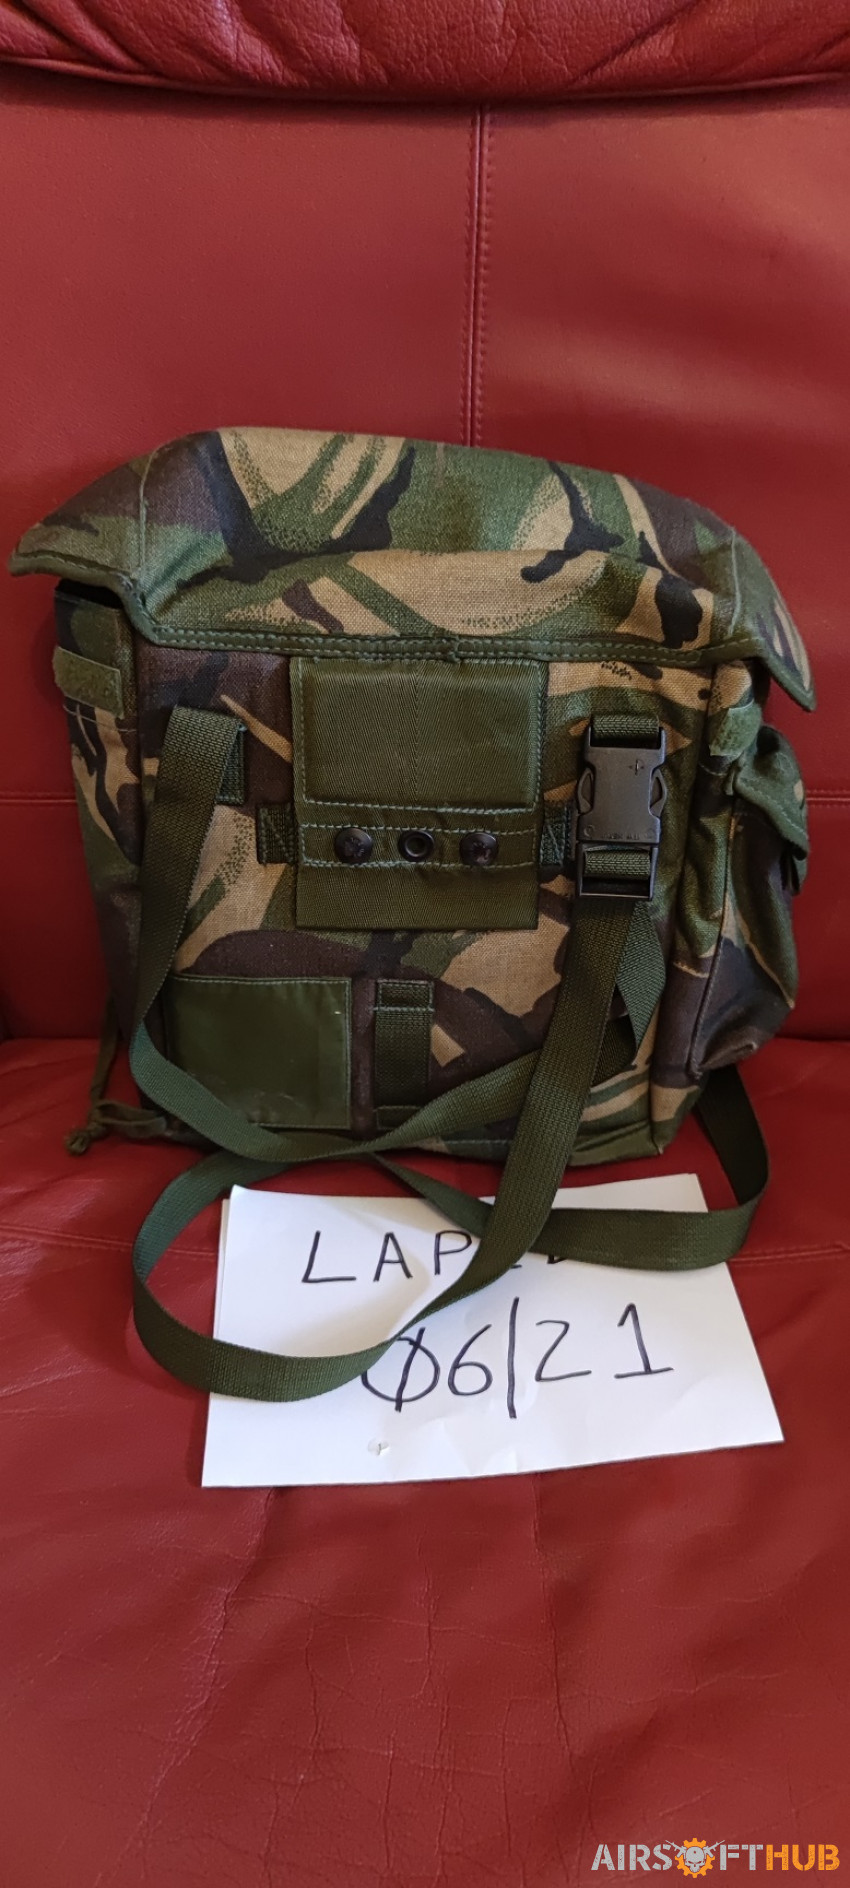 Army Issue Haversack Bag DPM - Used airsoft equipment